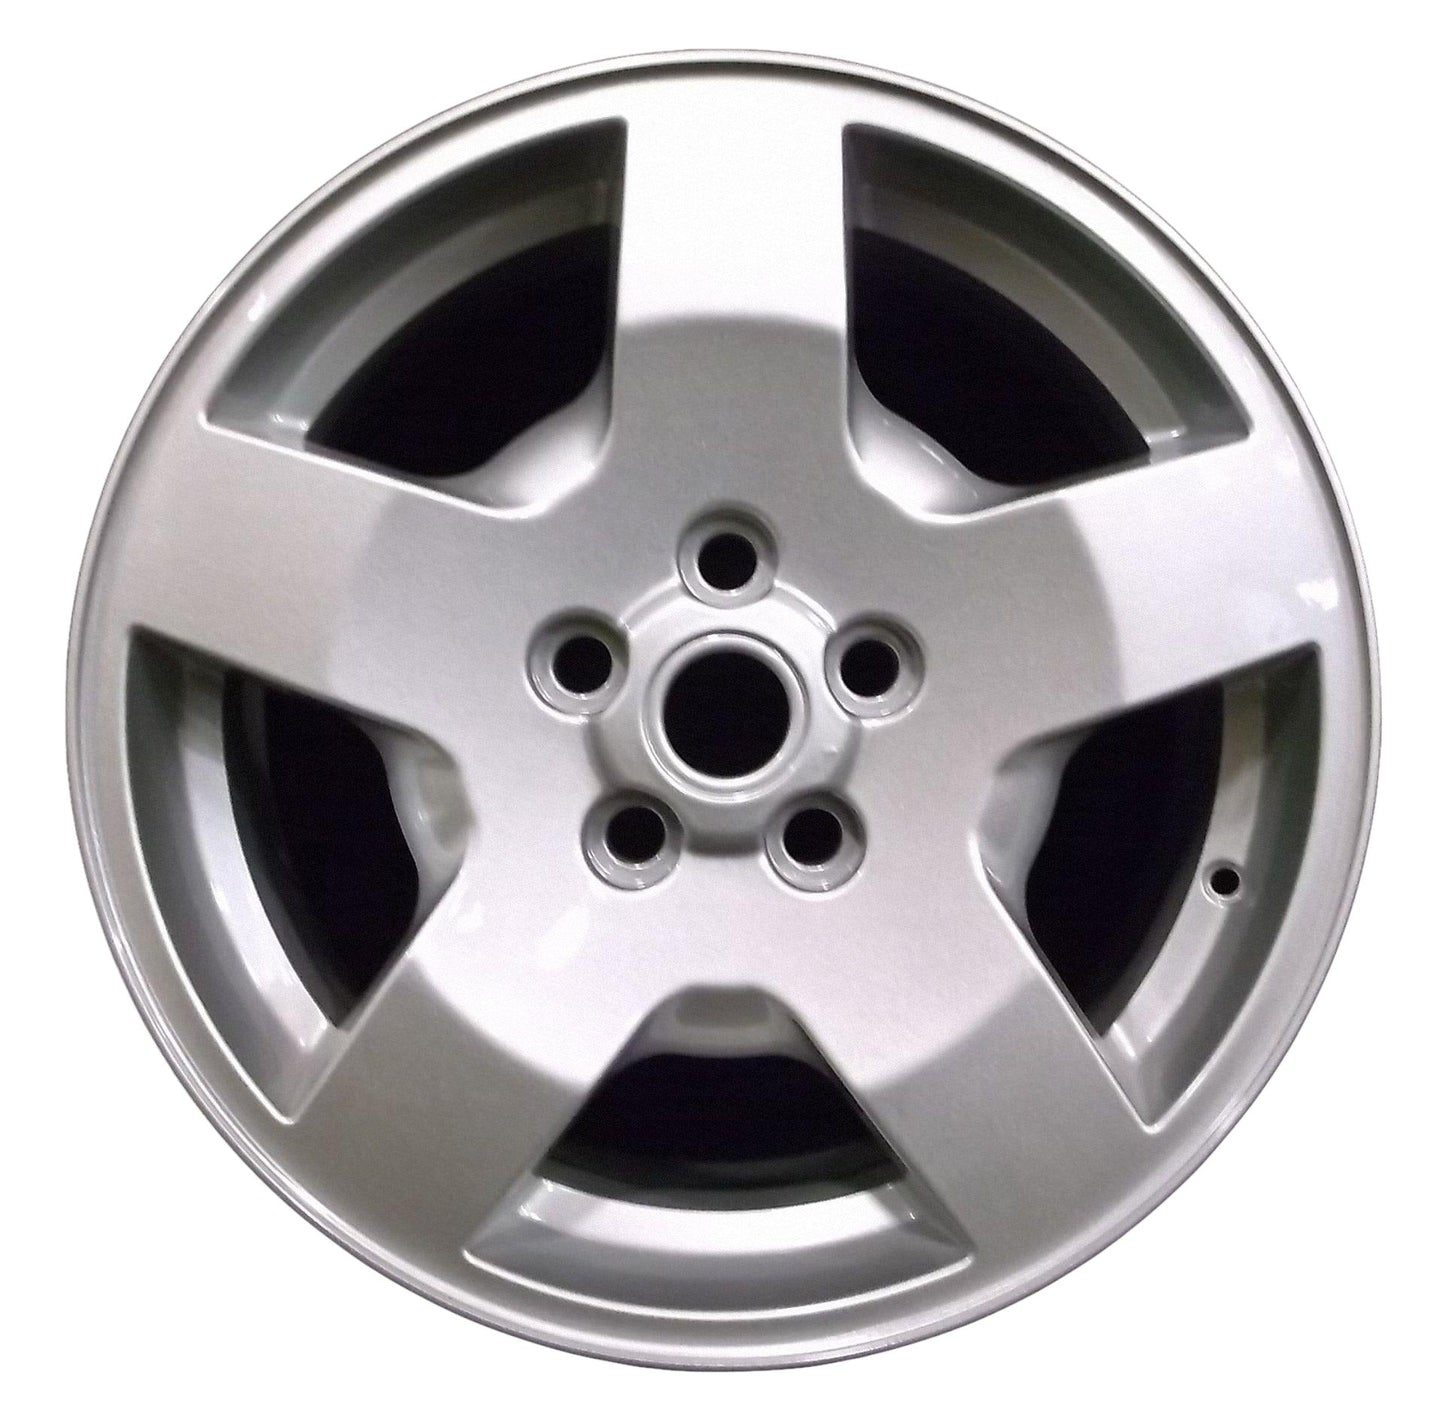 Land Rover LR3  2005, 2006 Factory OEM Car Wheel Size 18x8 Alloy WAO.72189.PS14.FF